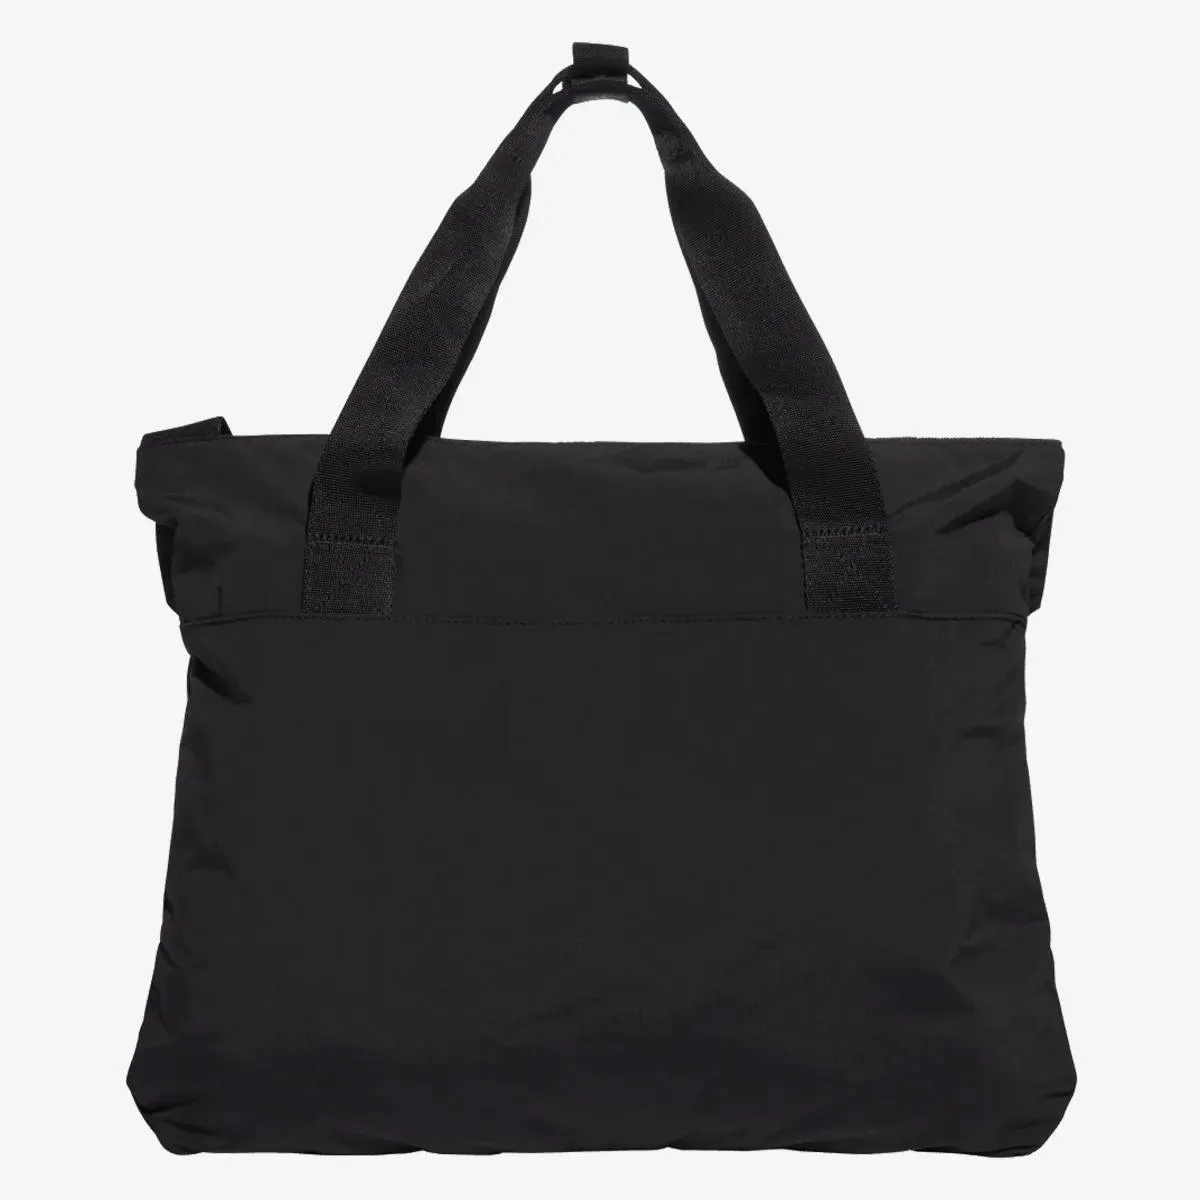 adidas T4H TOTE 